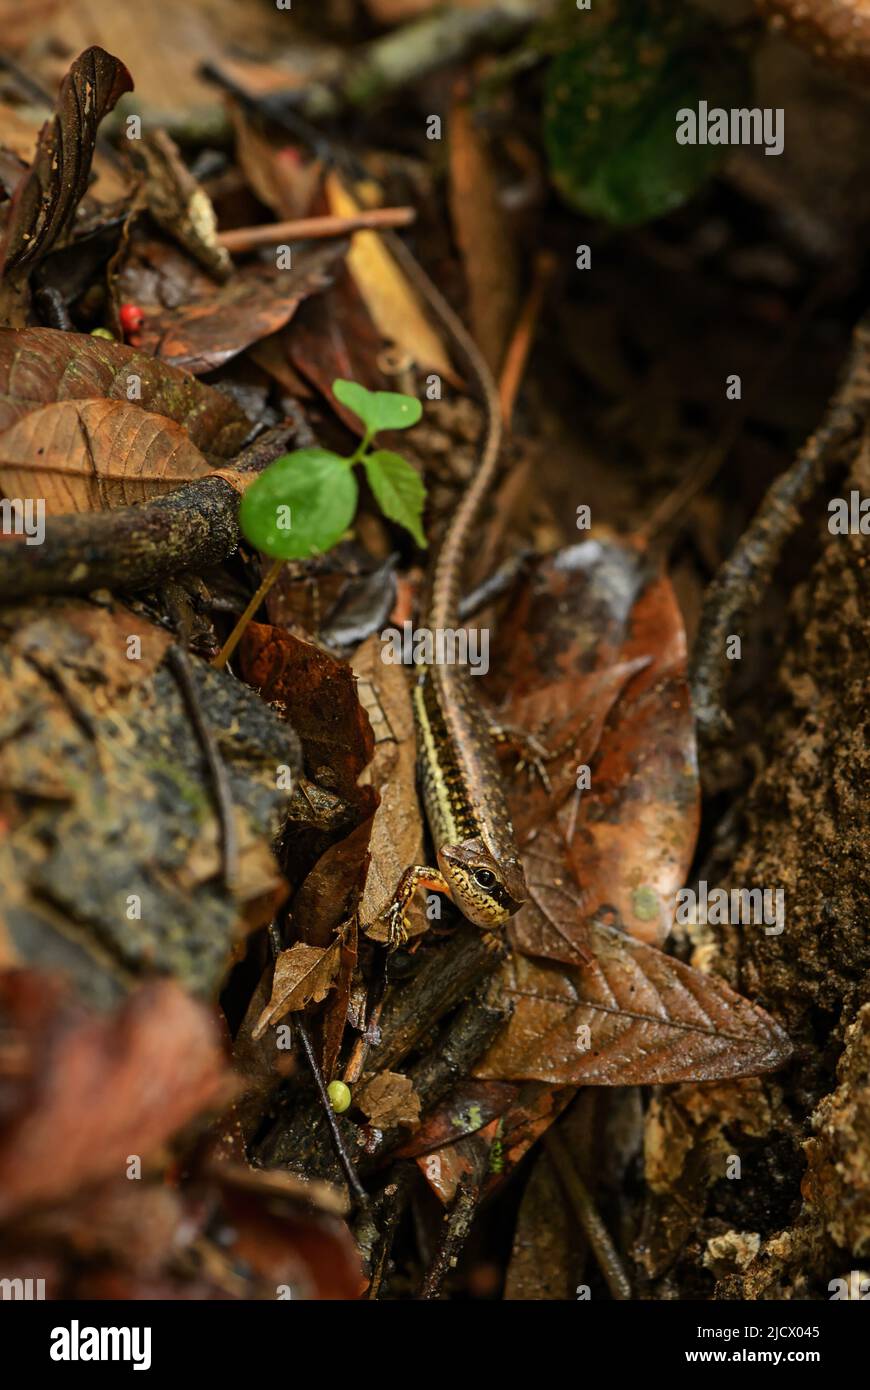 Spotted Forest Skink - Sphenomorphus maculatus, small hidden lizard from Asian forests and woodlands, Thailand. Stock Photo